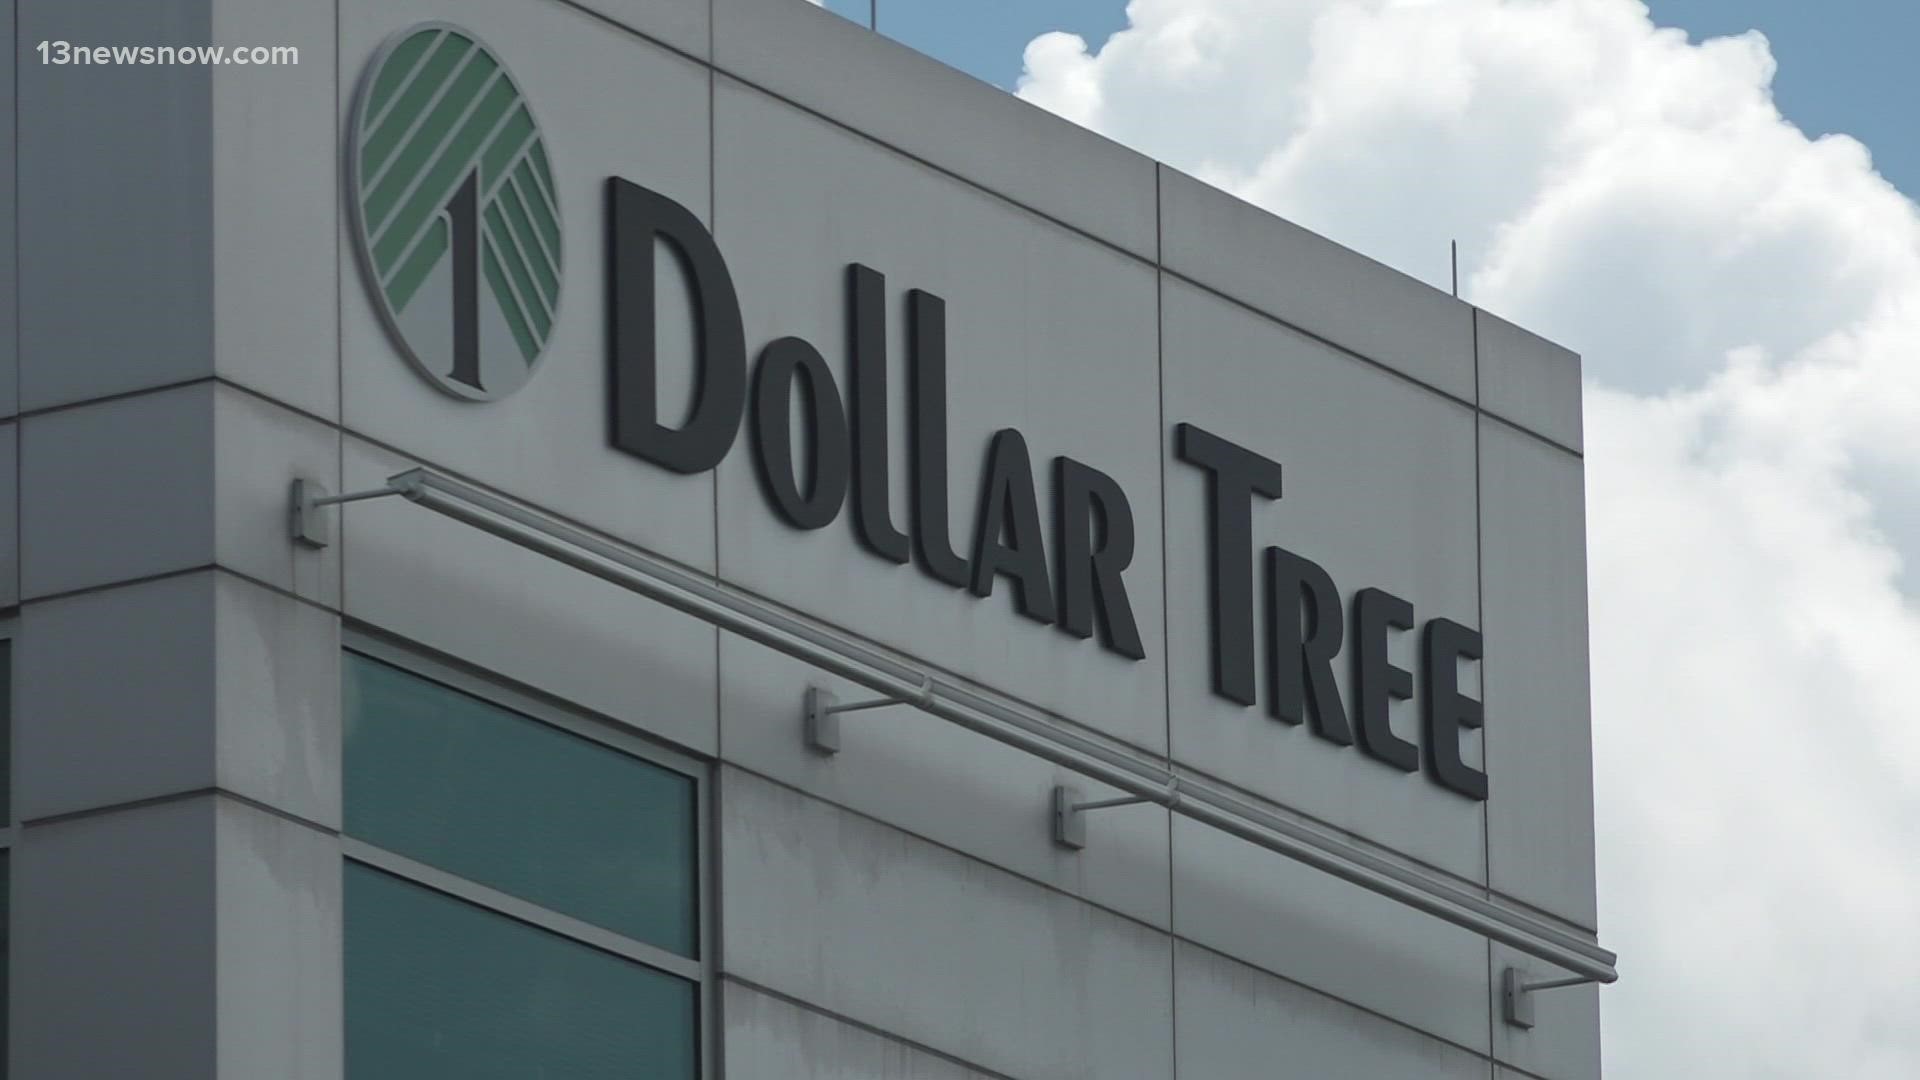 After expanding nationwide from only a handful of stores in Georgia, Tennessee and Virginia, Dollar Tree is breaking the "Everything's $1" mold it's had for decades.